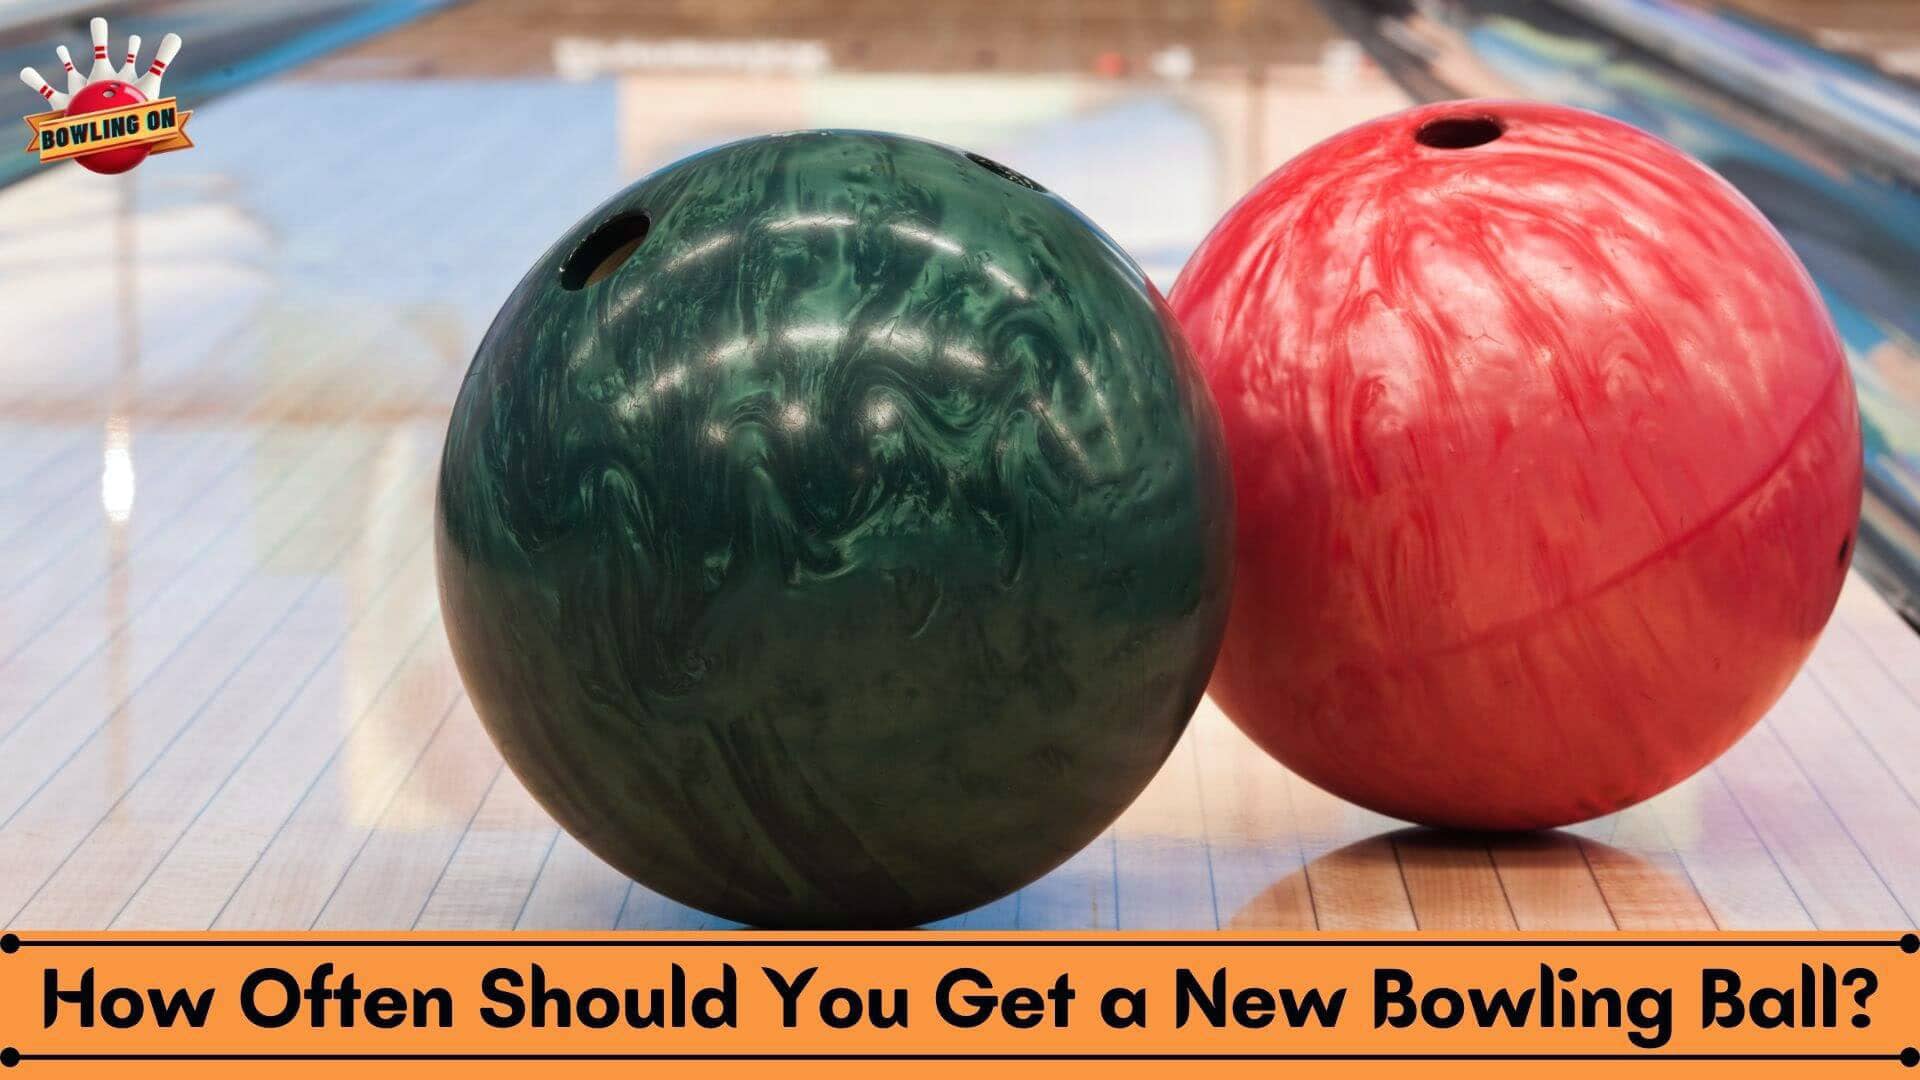 How Often Should You Get a New Bowling Ball